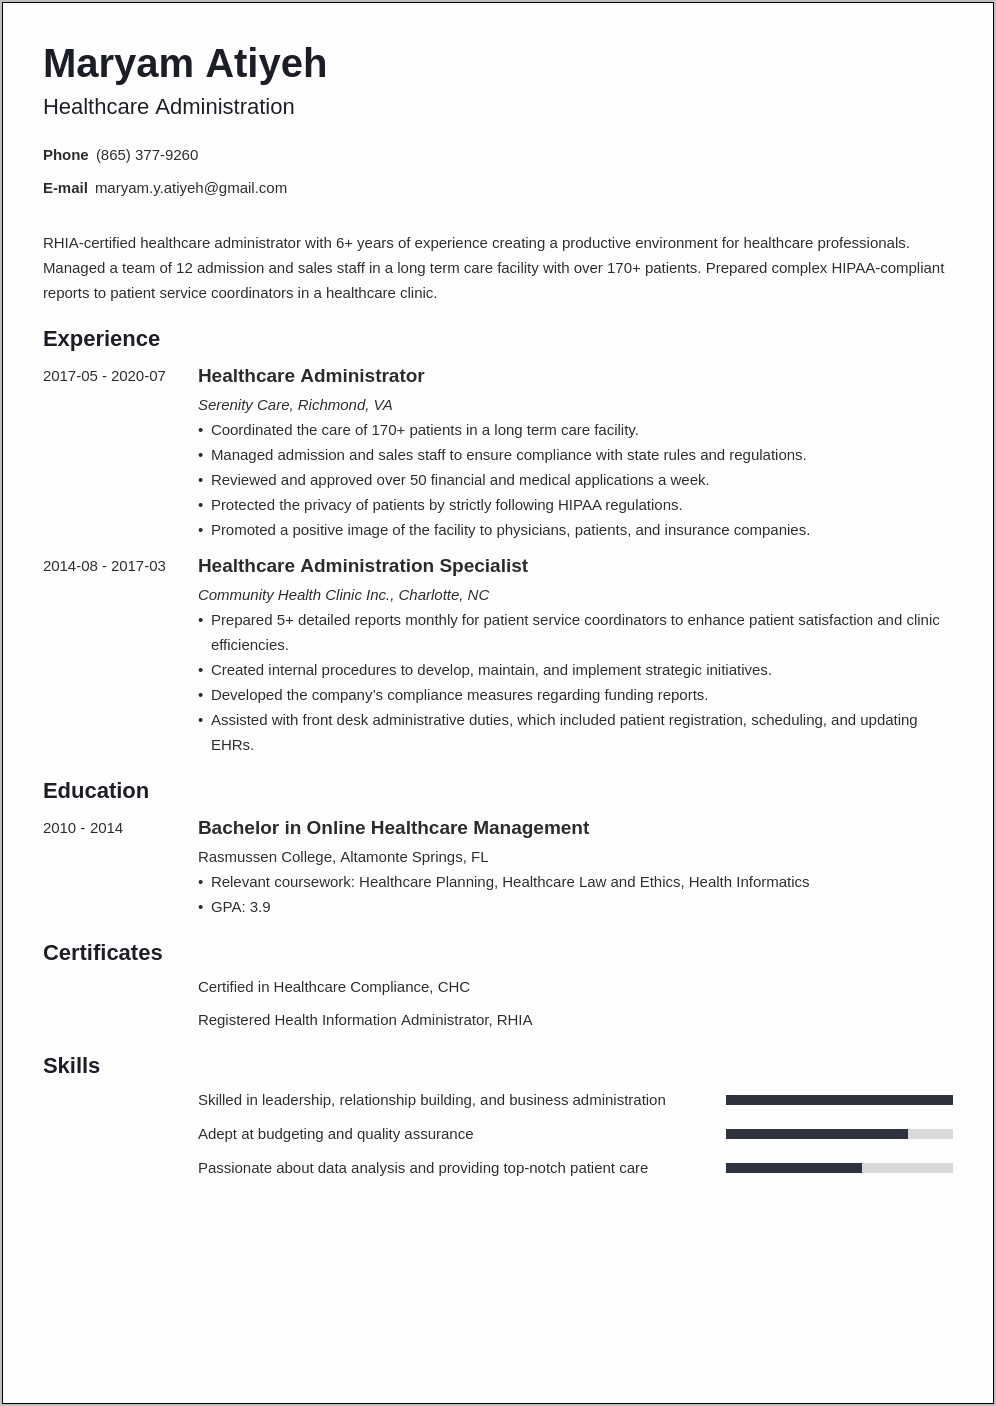 Healthcare Career Objective On Resume